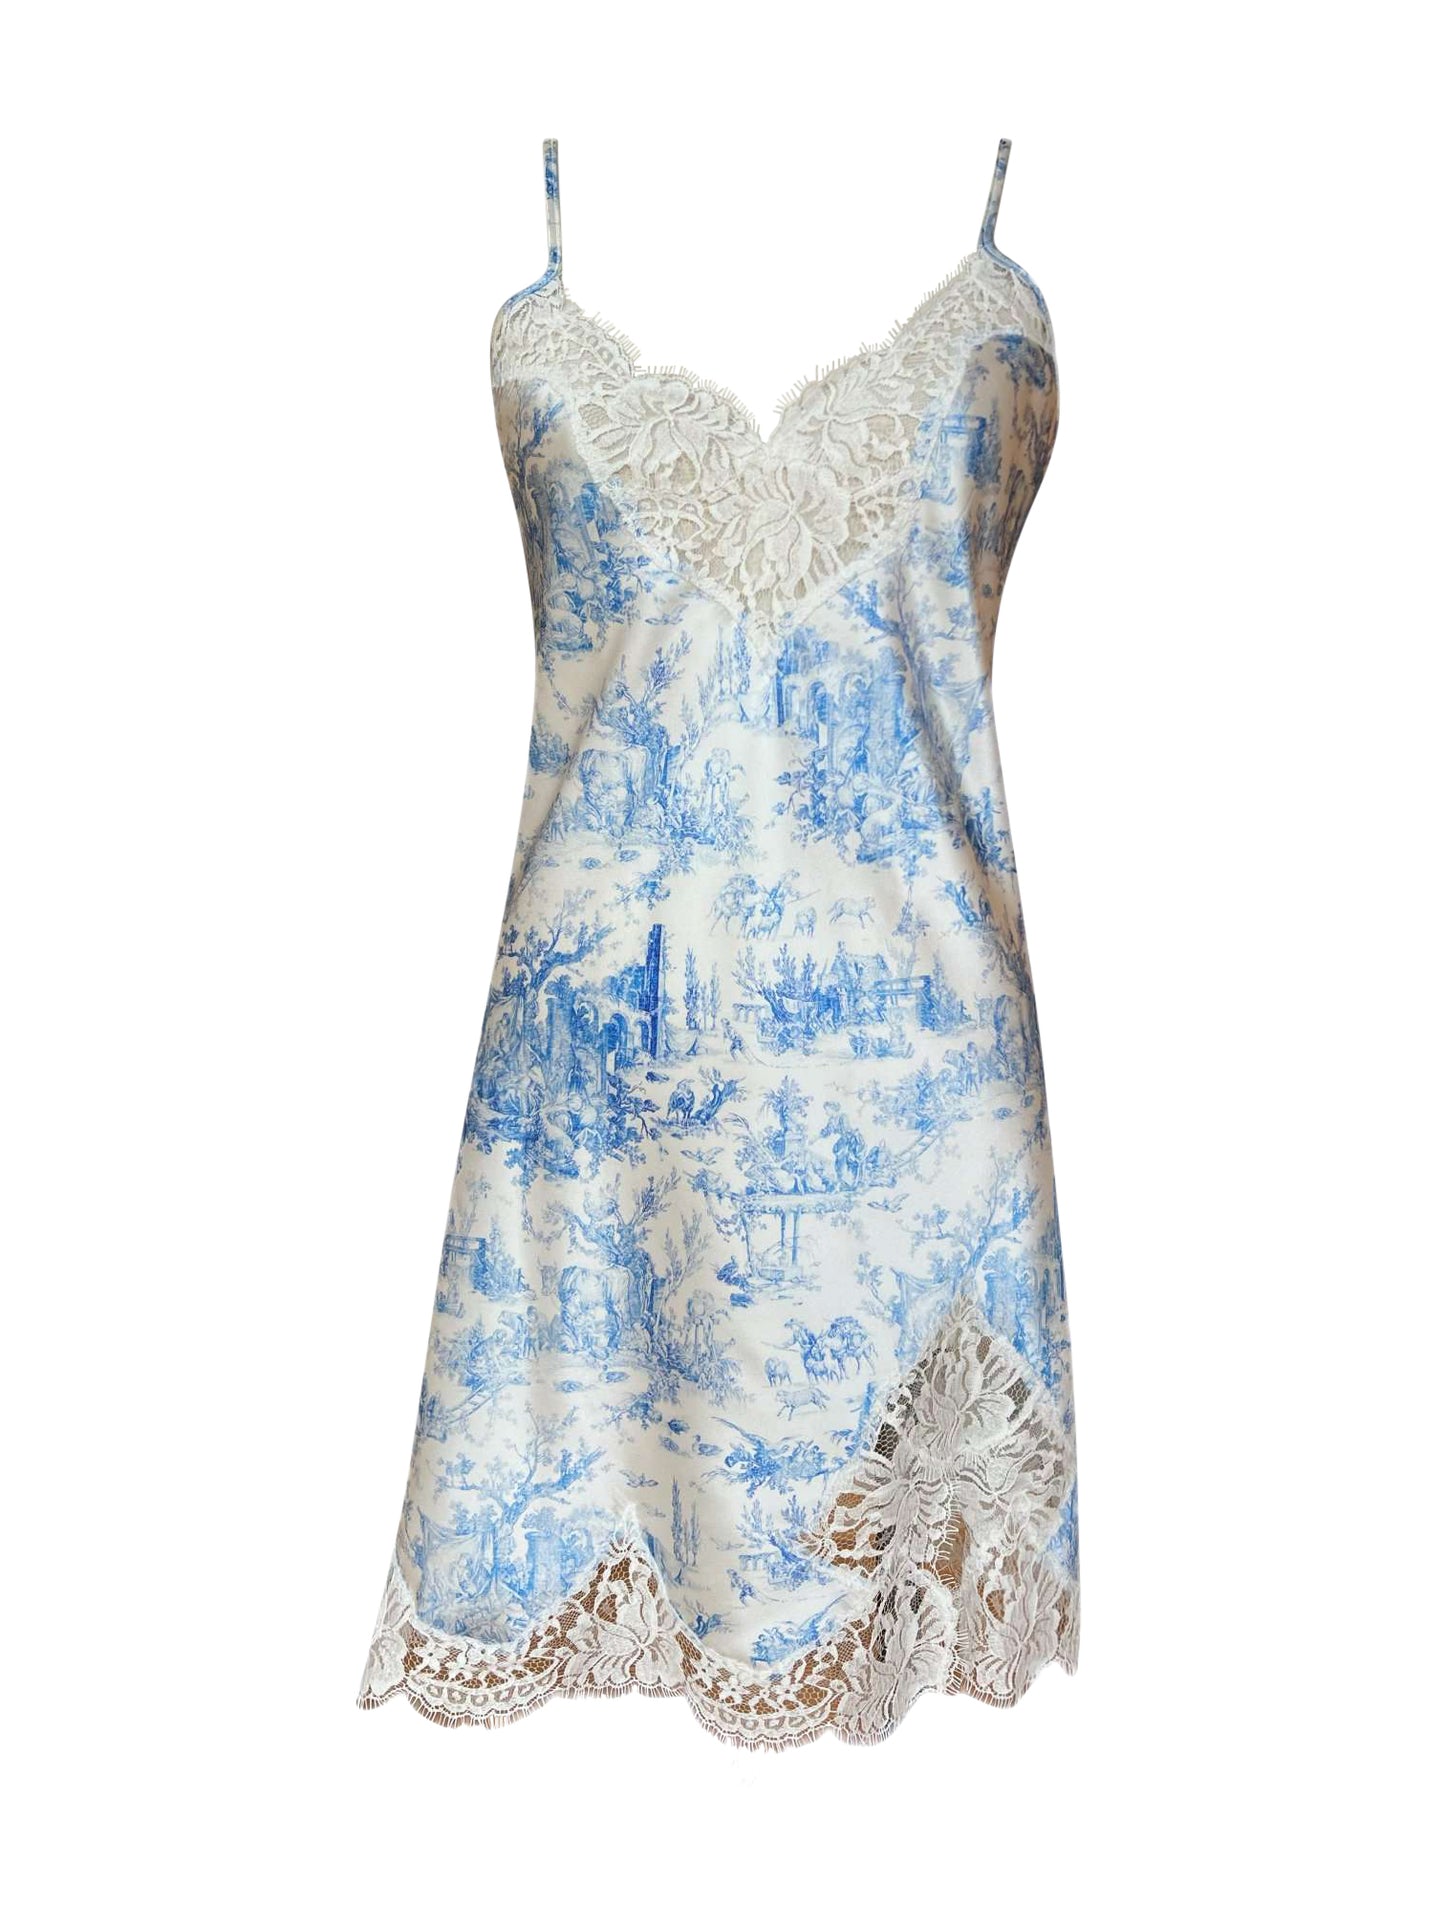 Toile de jouy Silk Slip with Scalloped French Lace